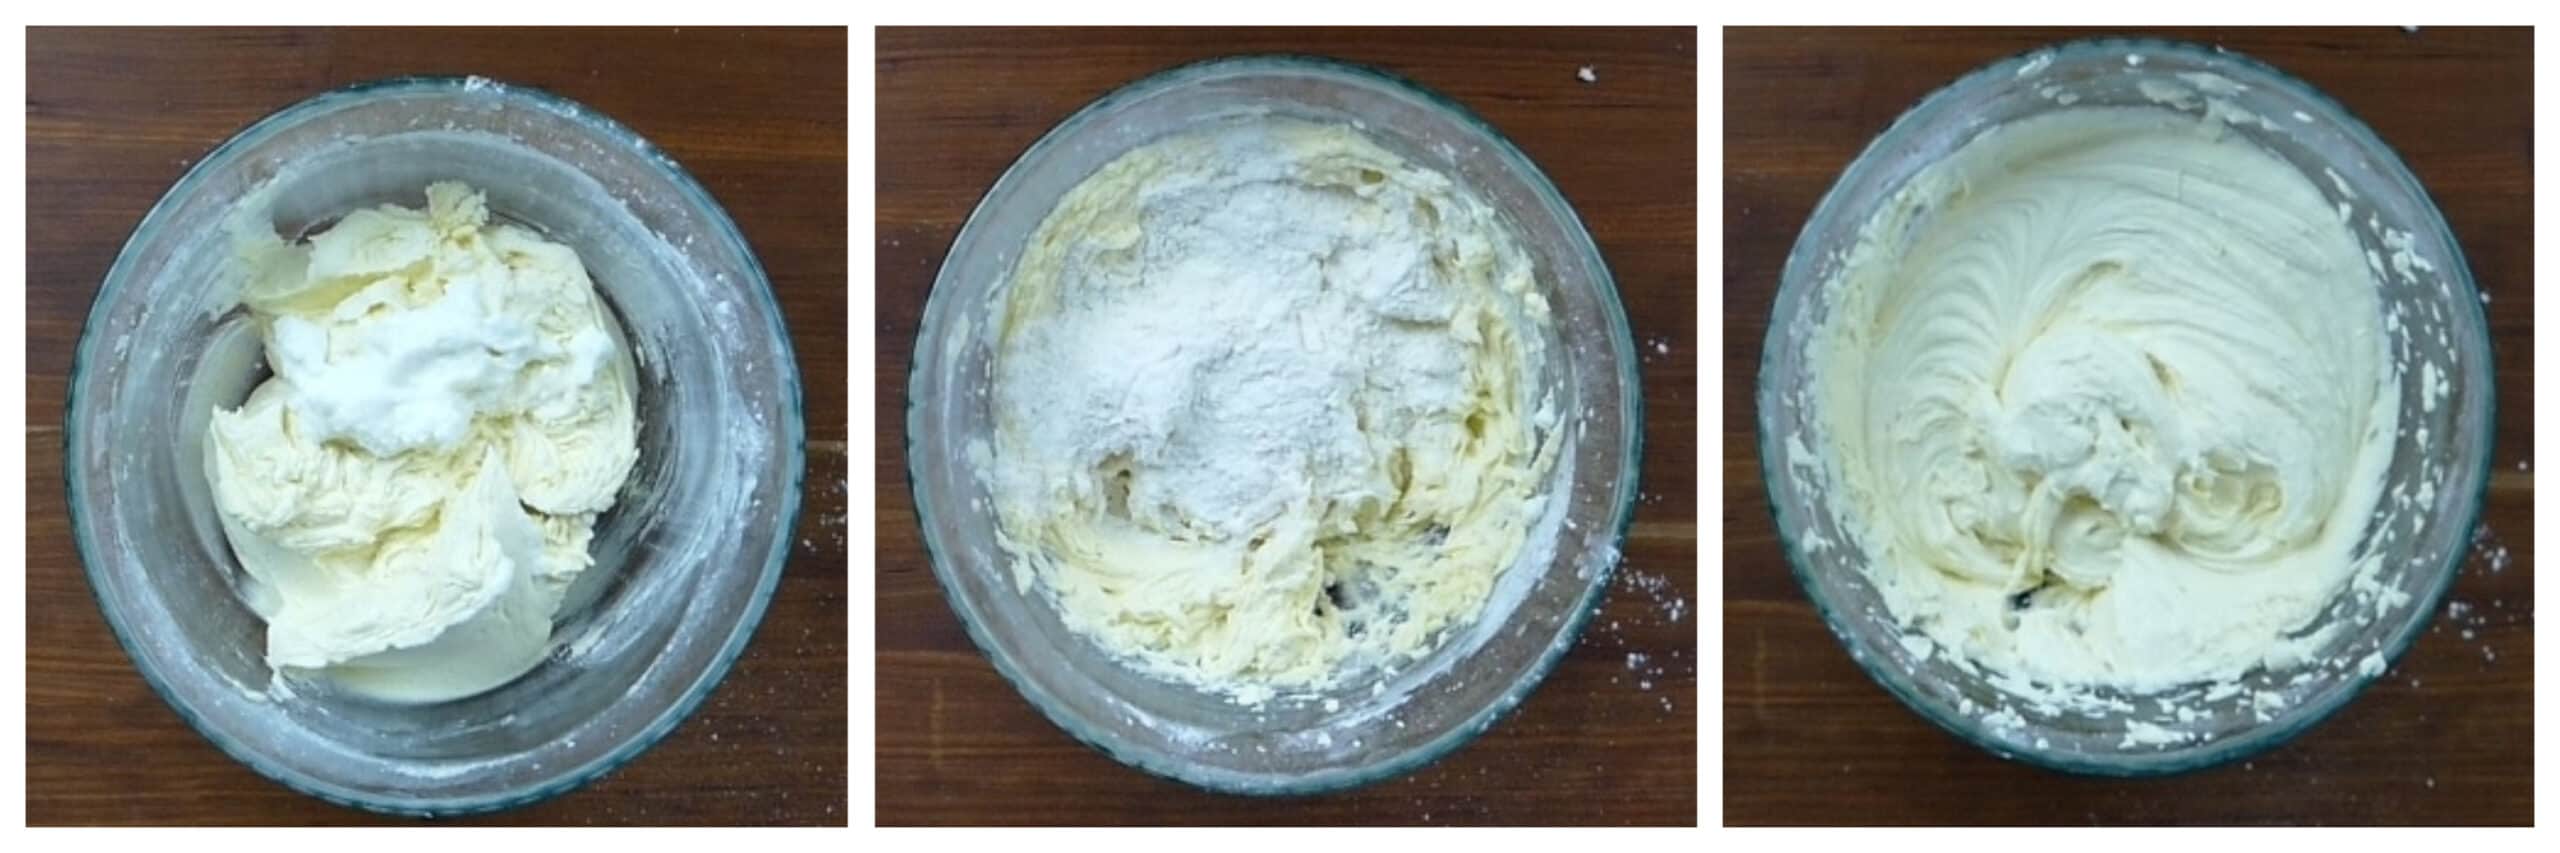 Instant Pot Air Fryer Pound Cake collage - sour cream on batter, flour on batter, all mixed